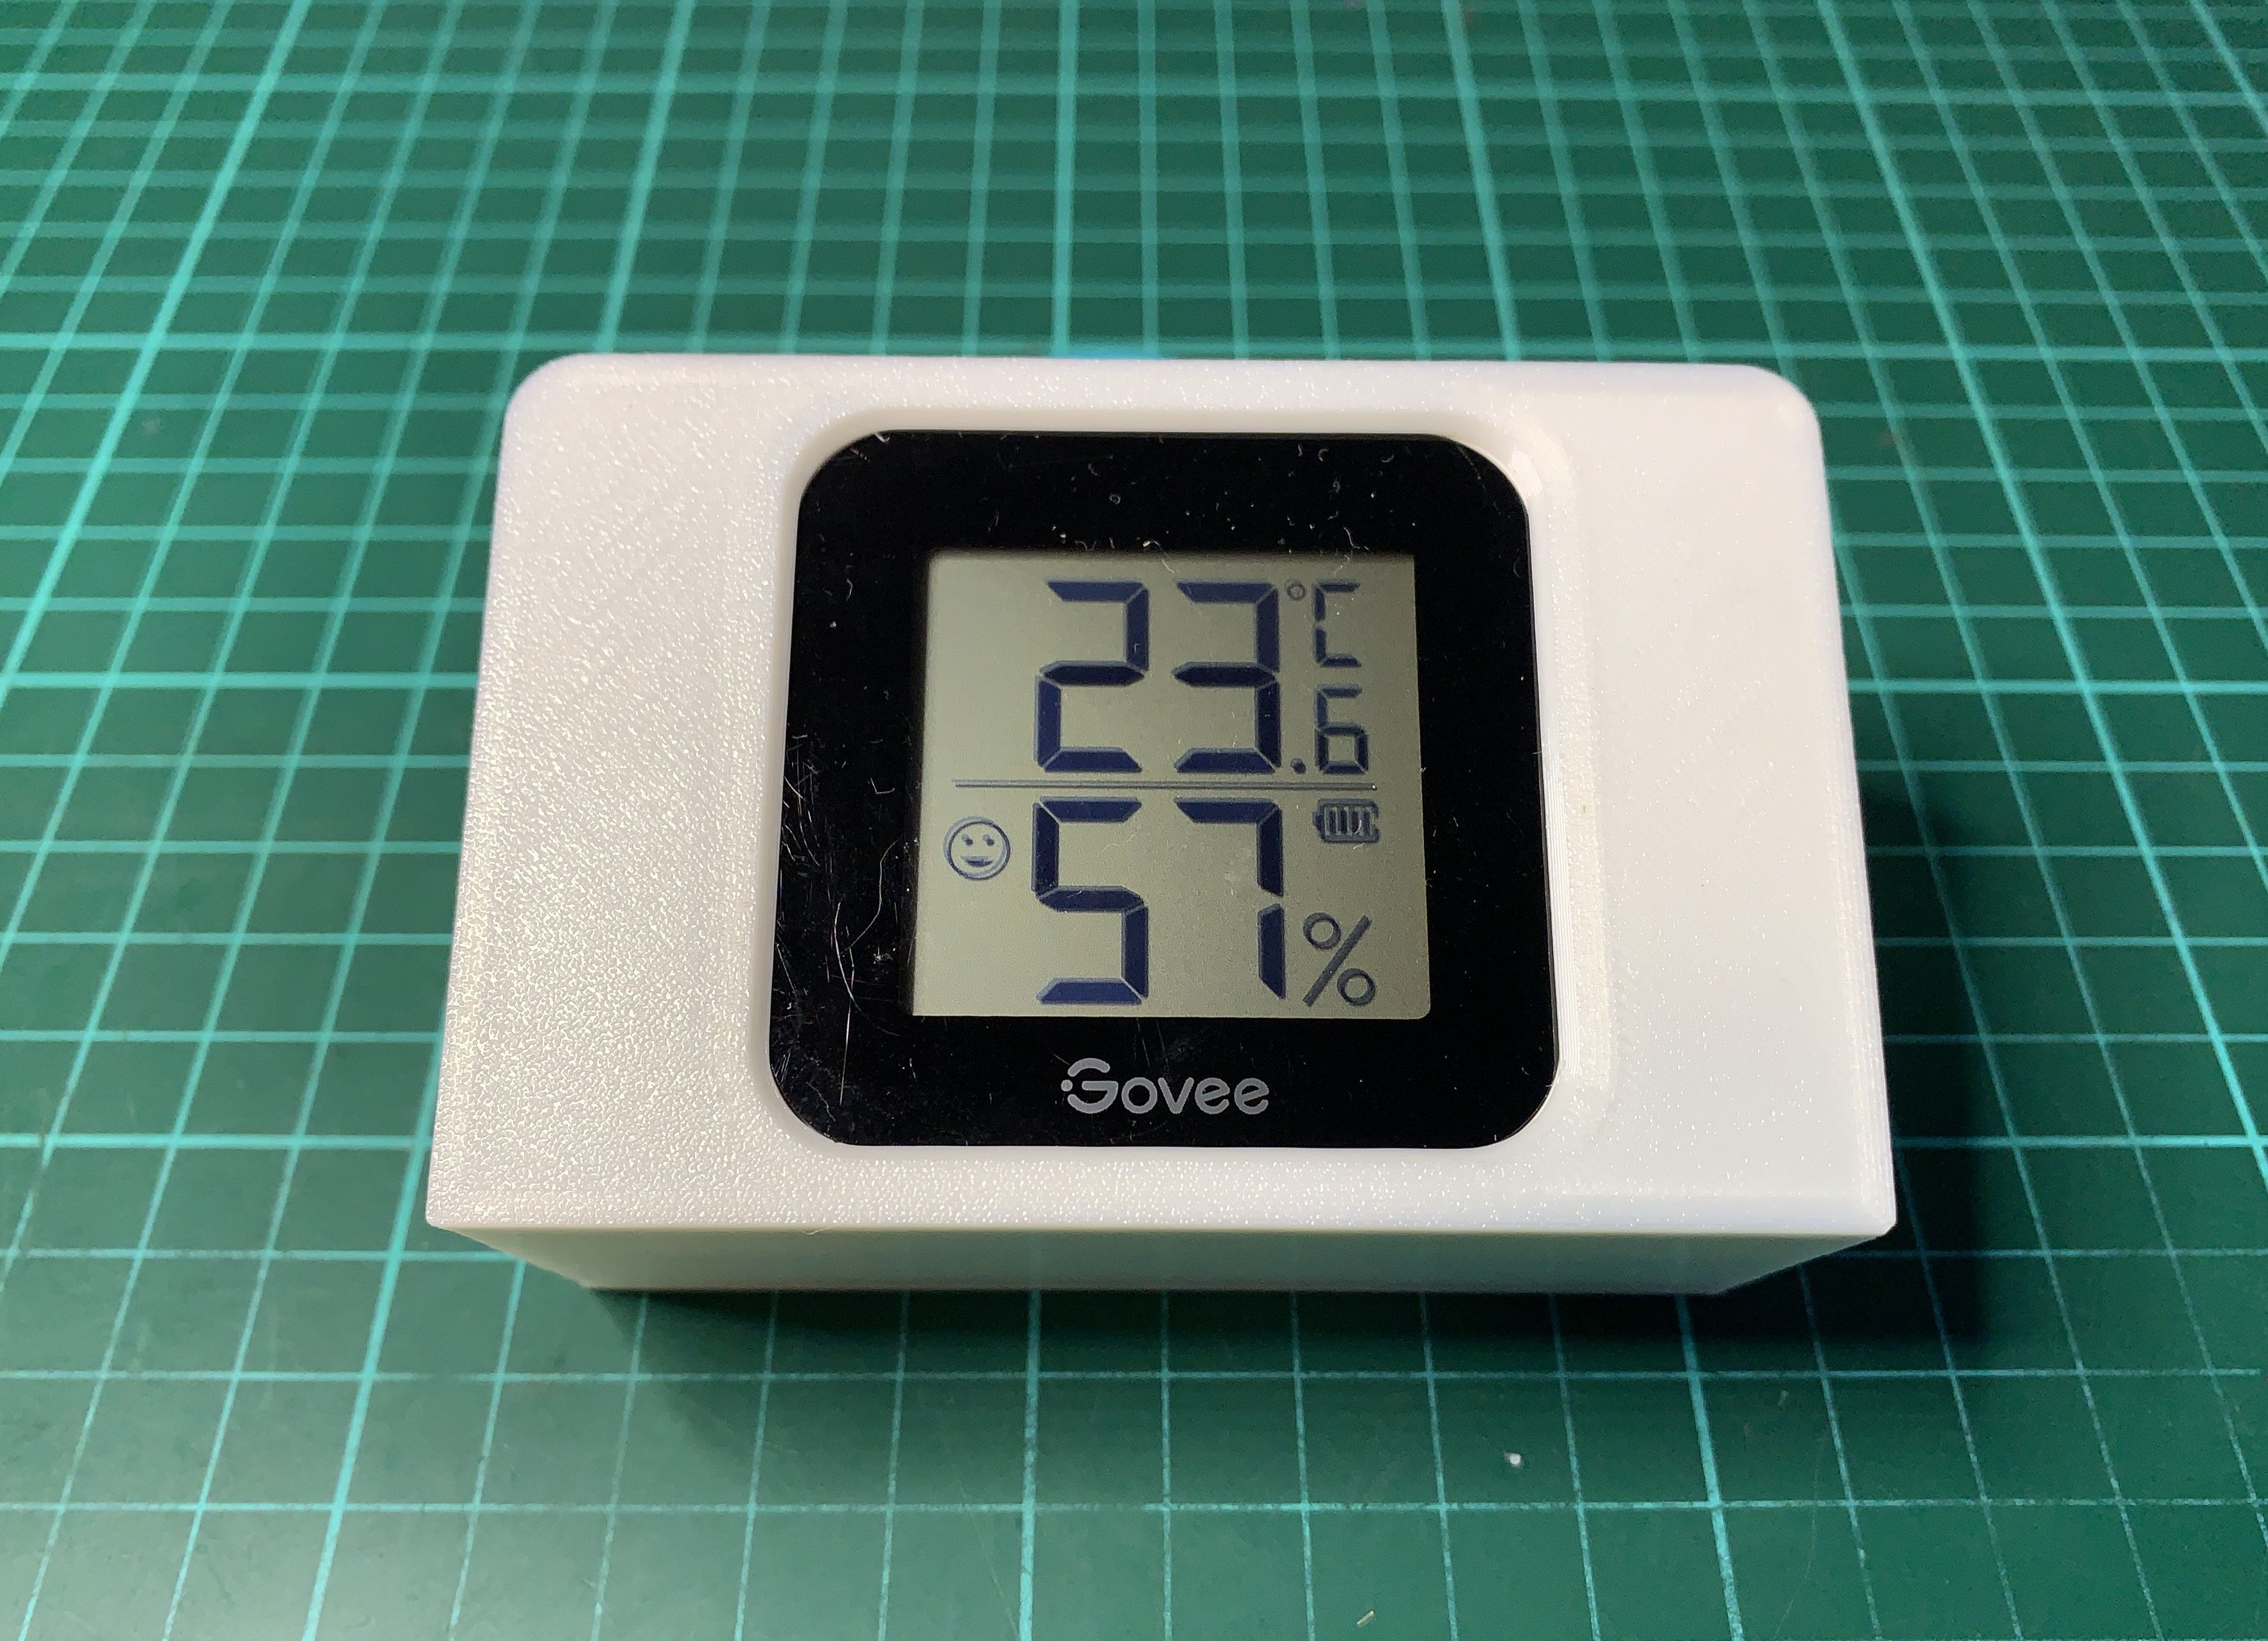 Govee Meat Thermometer Case by thedude386